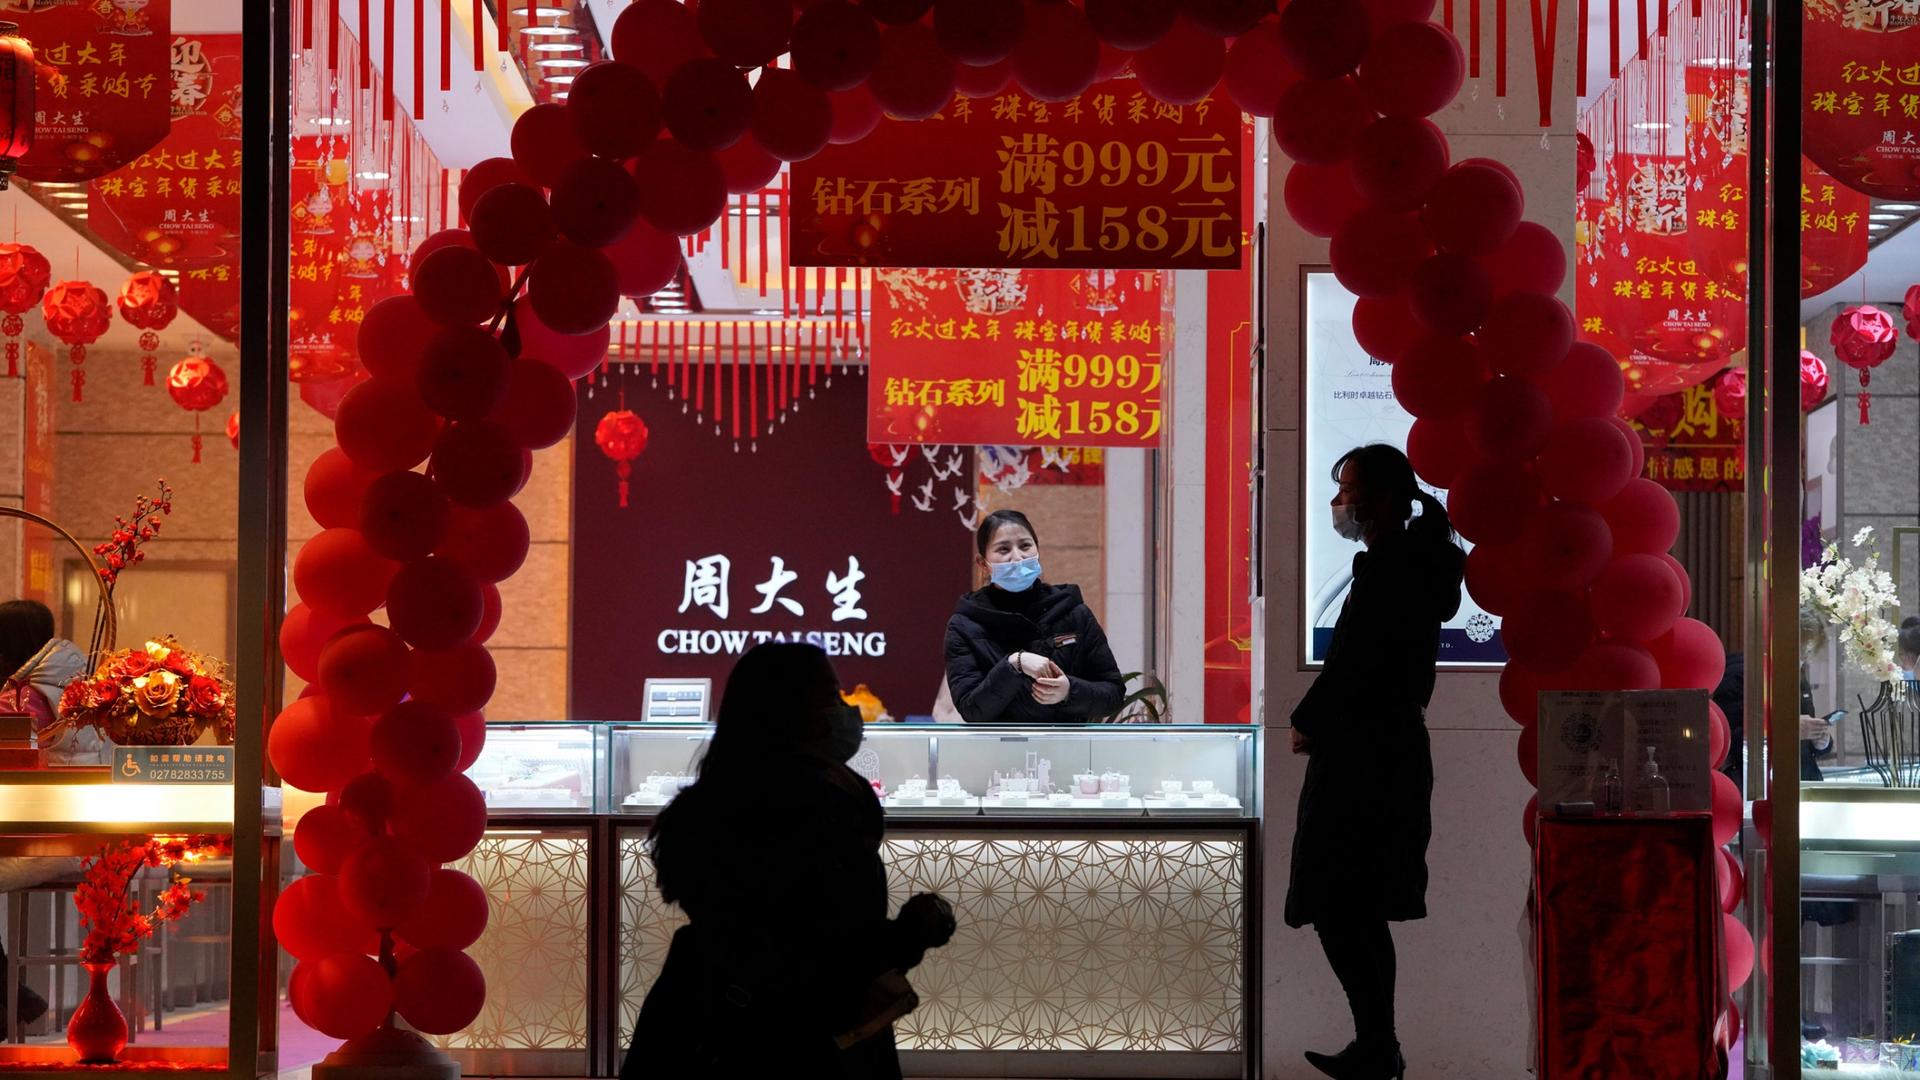 The the front window of jewelry store is shown framed by an arc of red balloons.